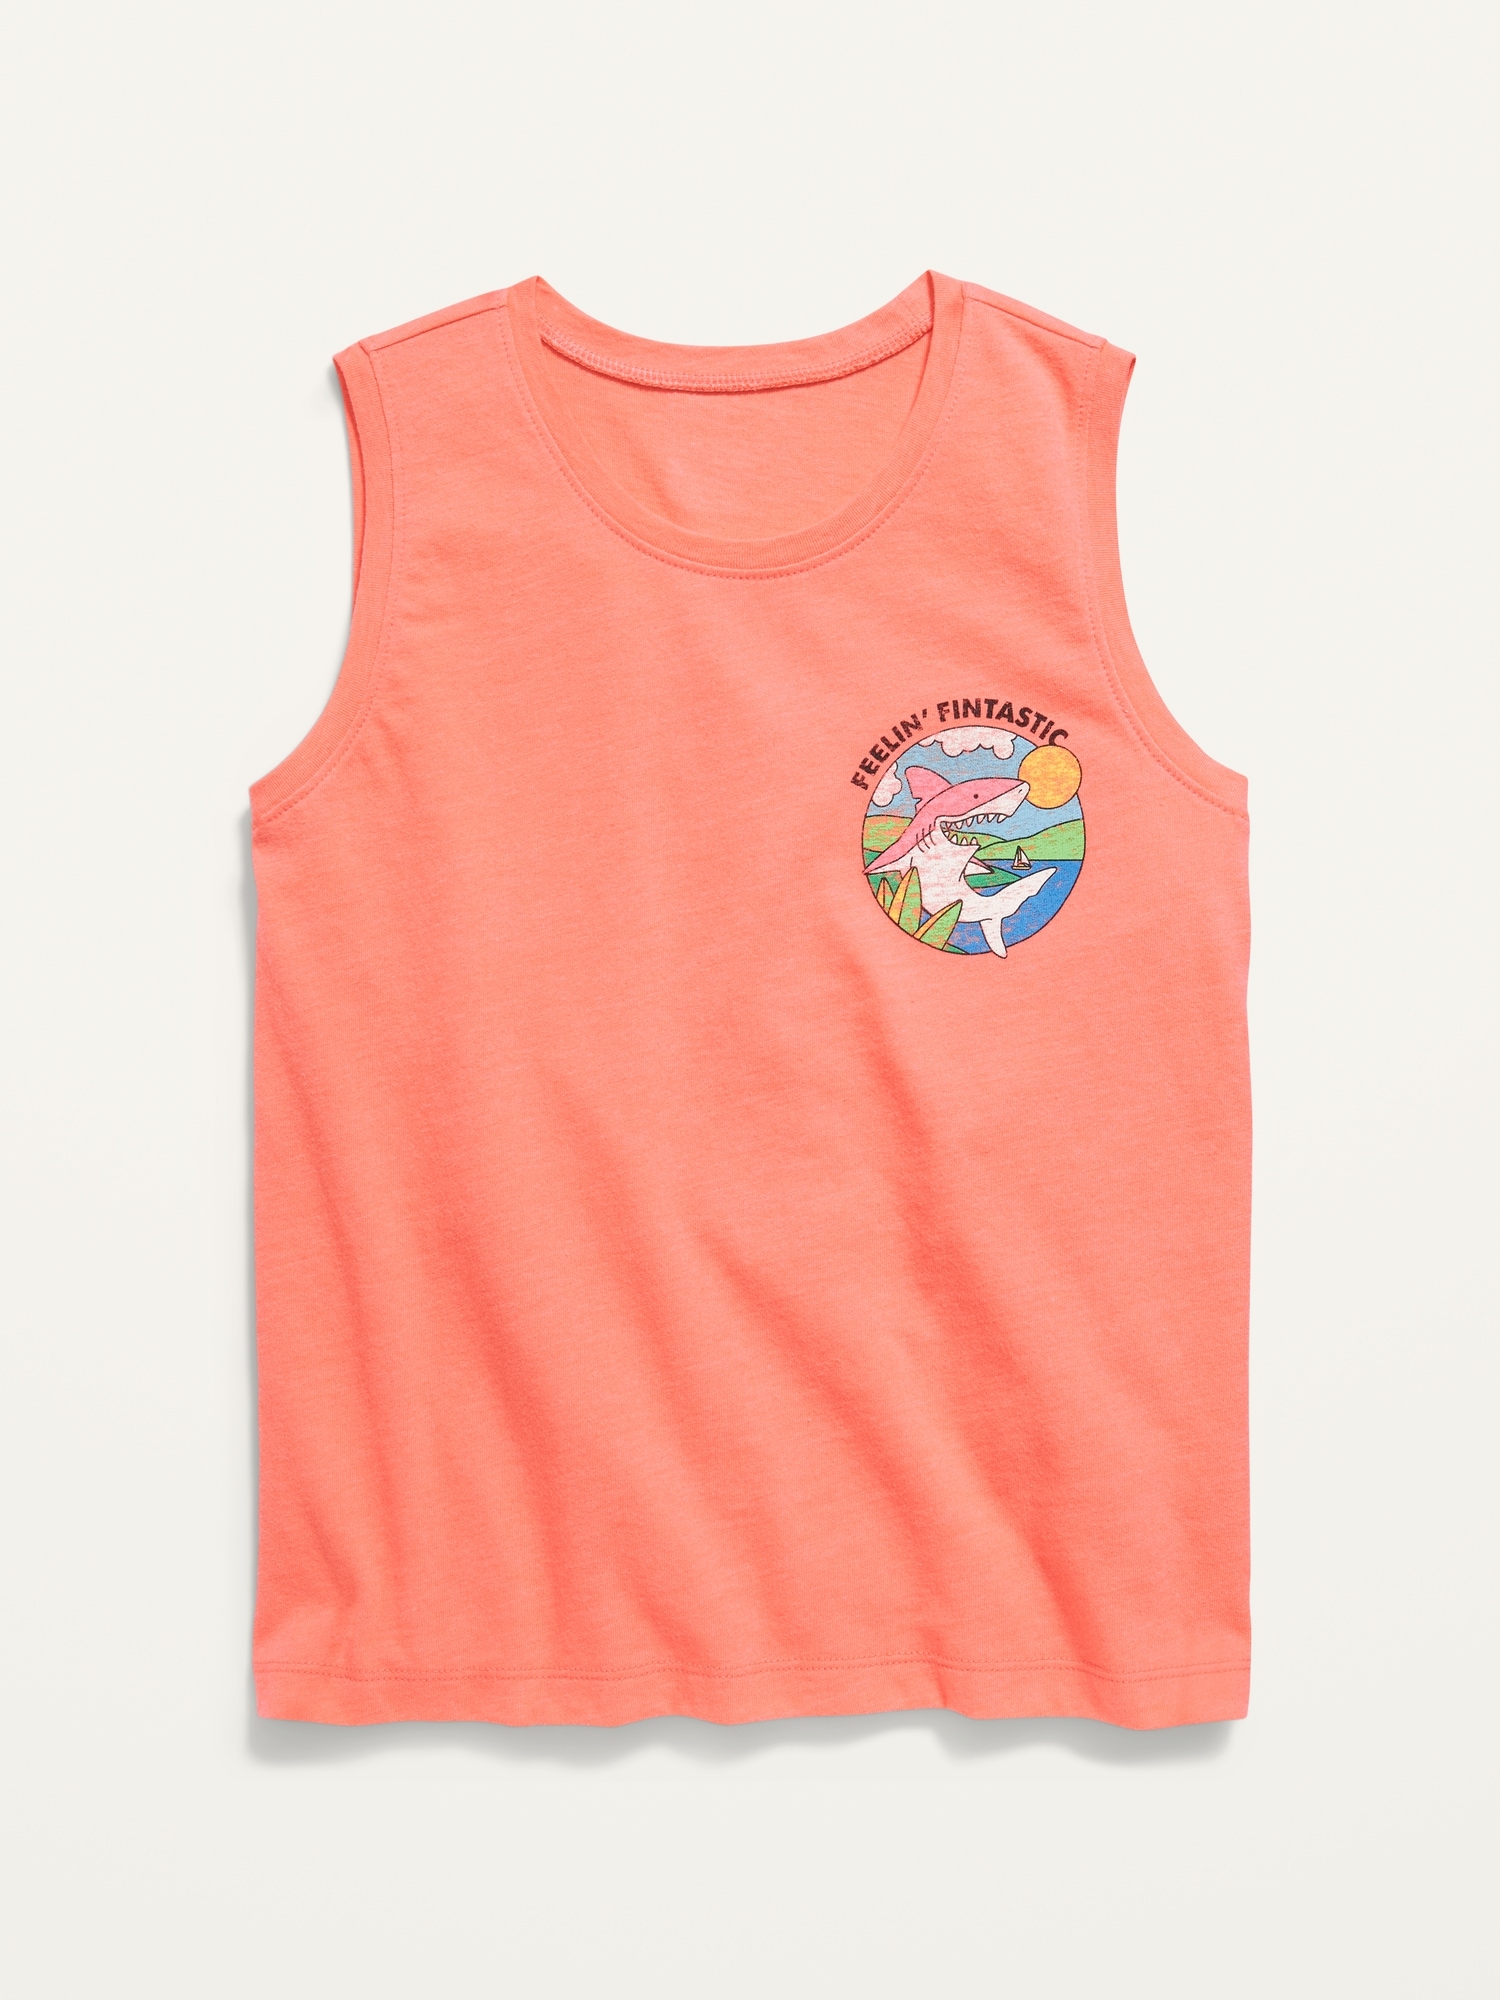 Old Navy Soft-Washed Graphic Sleeveless T-Shirt for Girls pink. 1